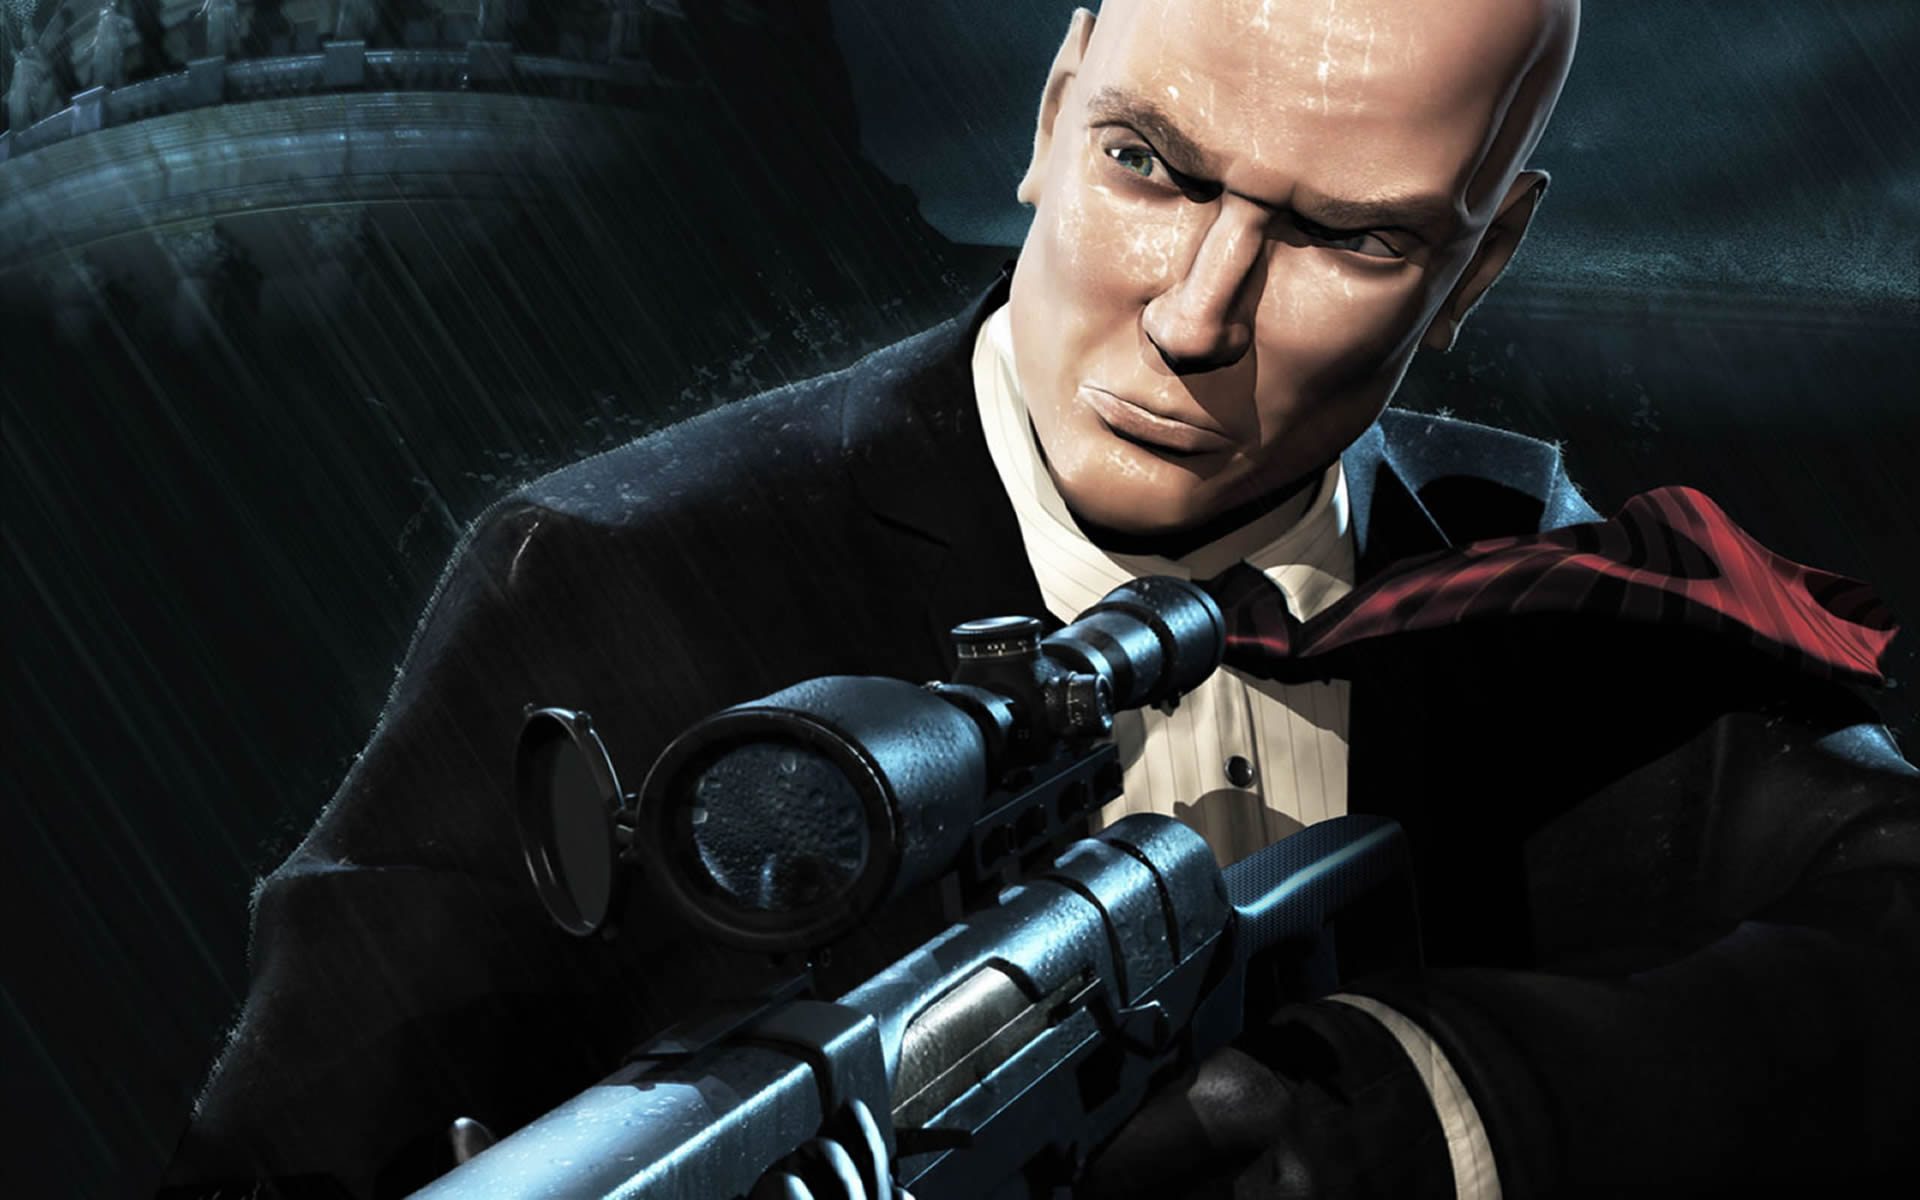 Agent 47 With Sniper Rifle - Agent 47 Hitman 2 - HD Wallpaper 